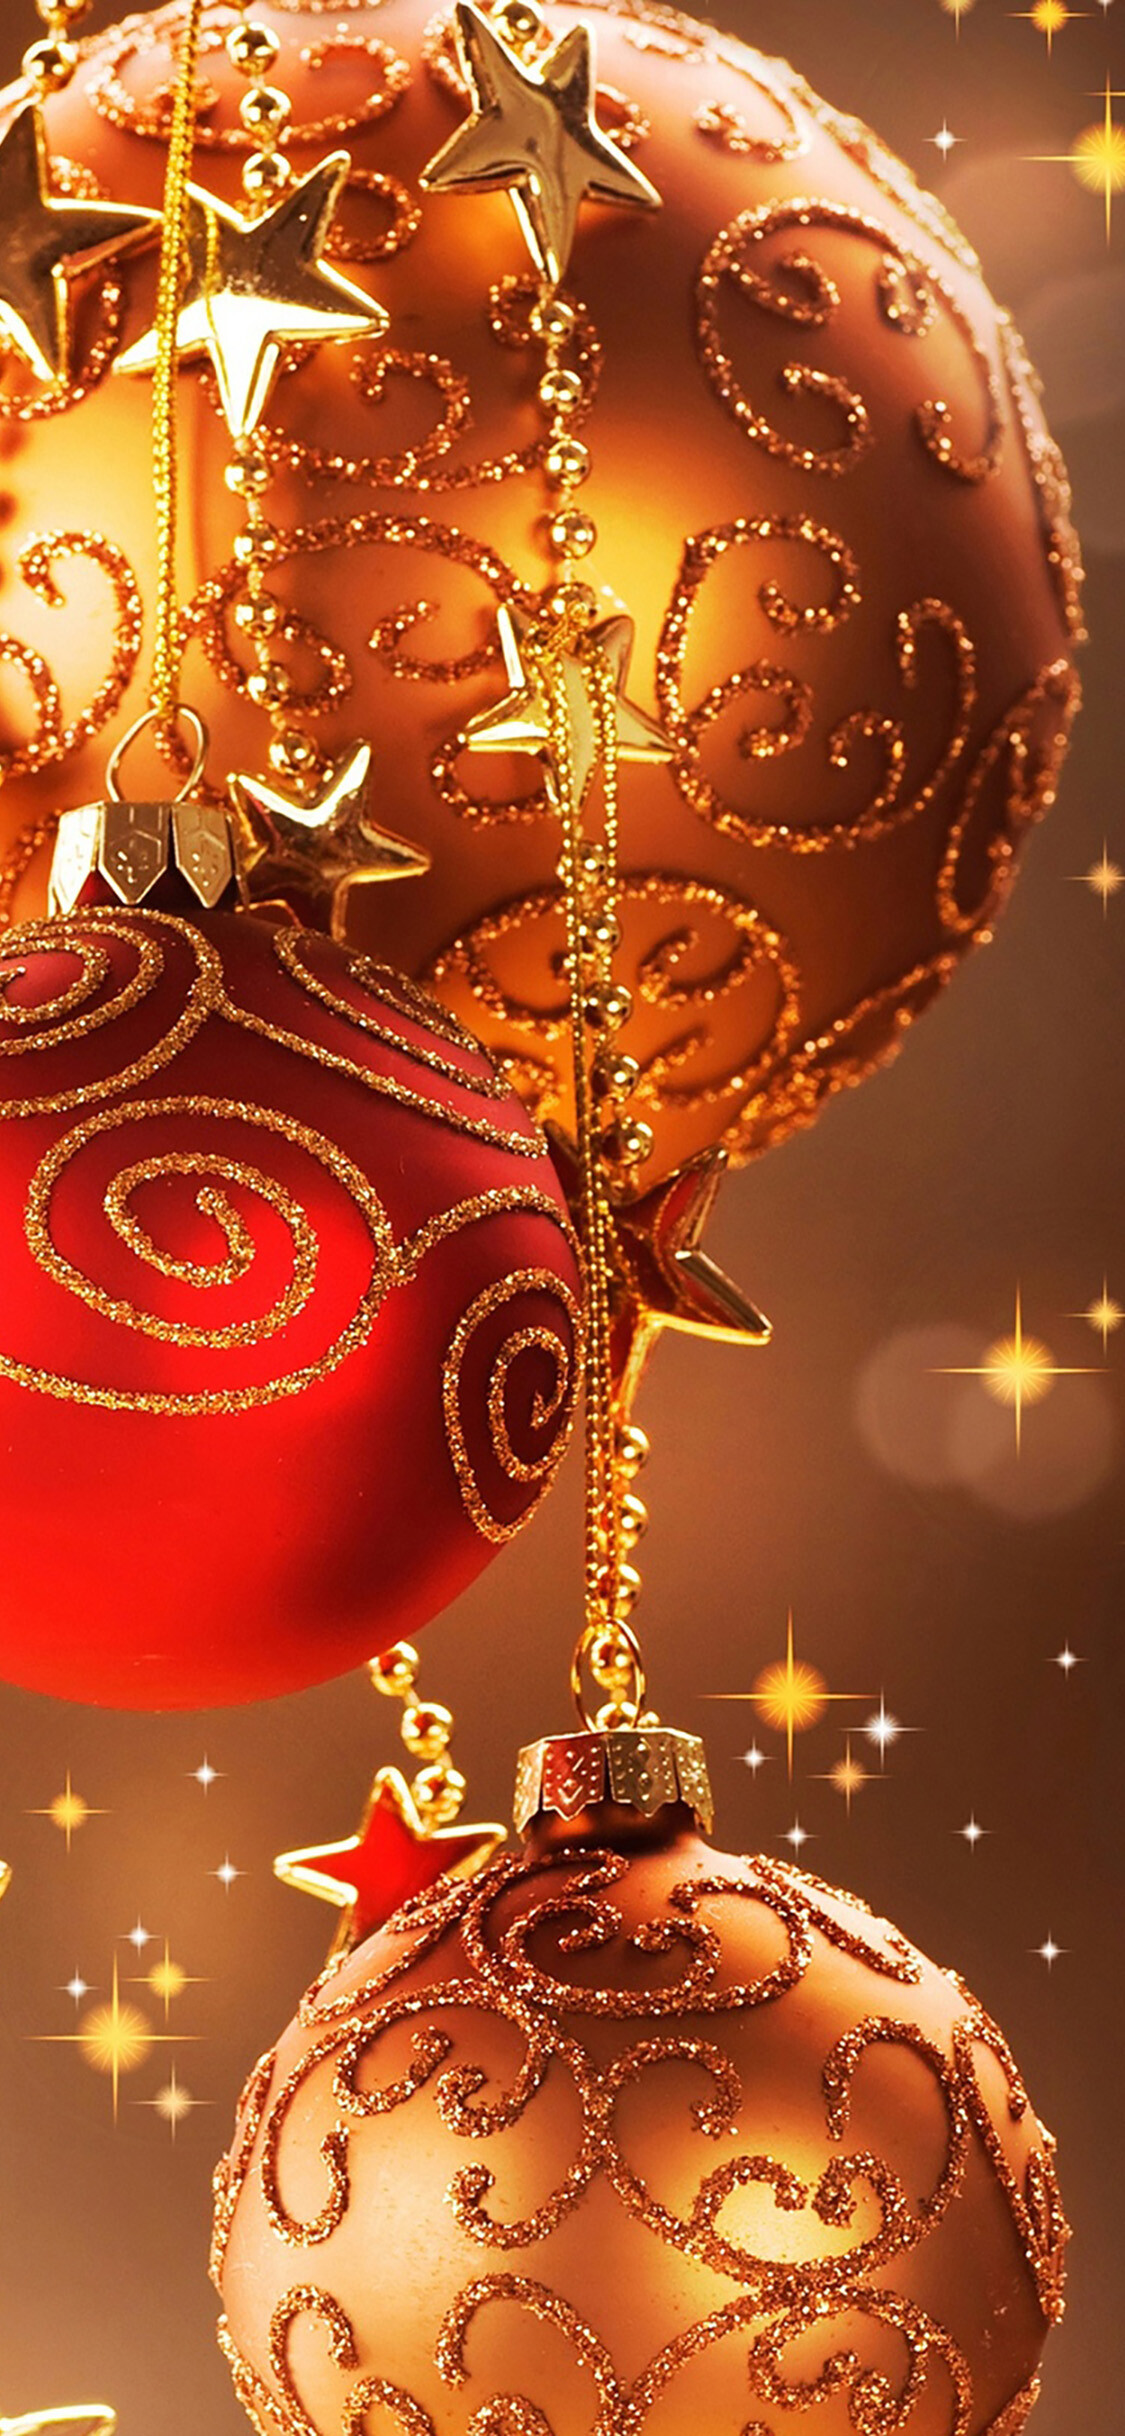 Christmas Ornament: Decorations, Available in a variety of geometric shapes and image depictions. 1130x2440 HD Background.